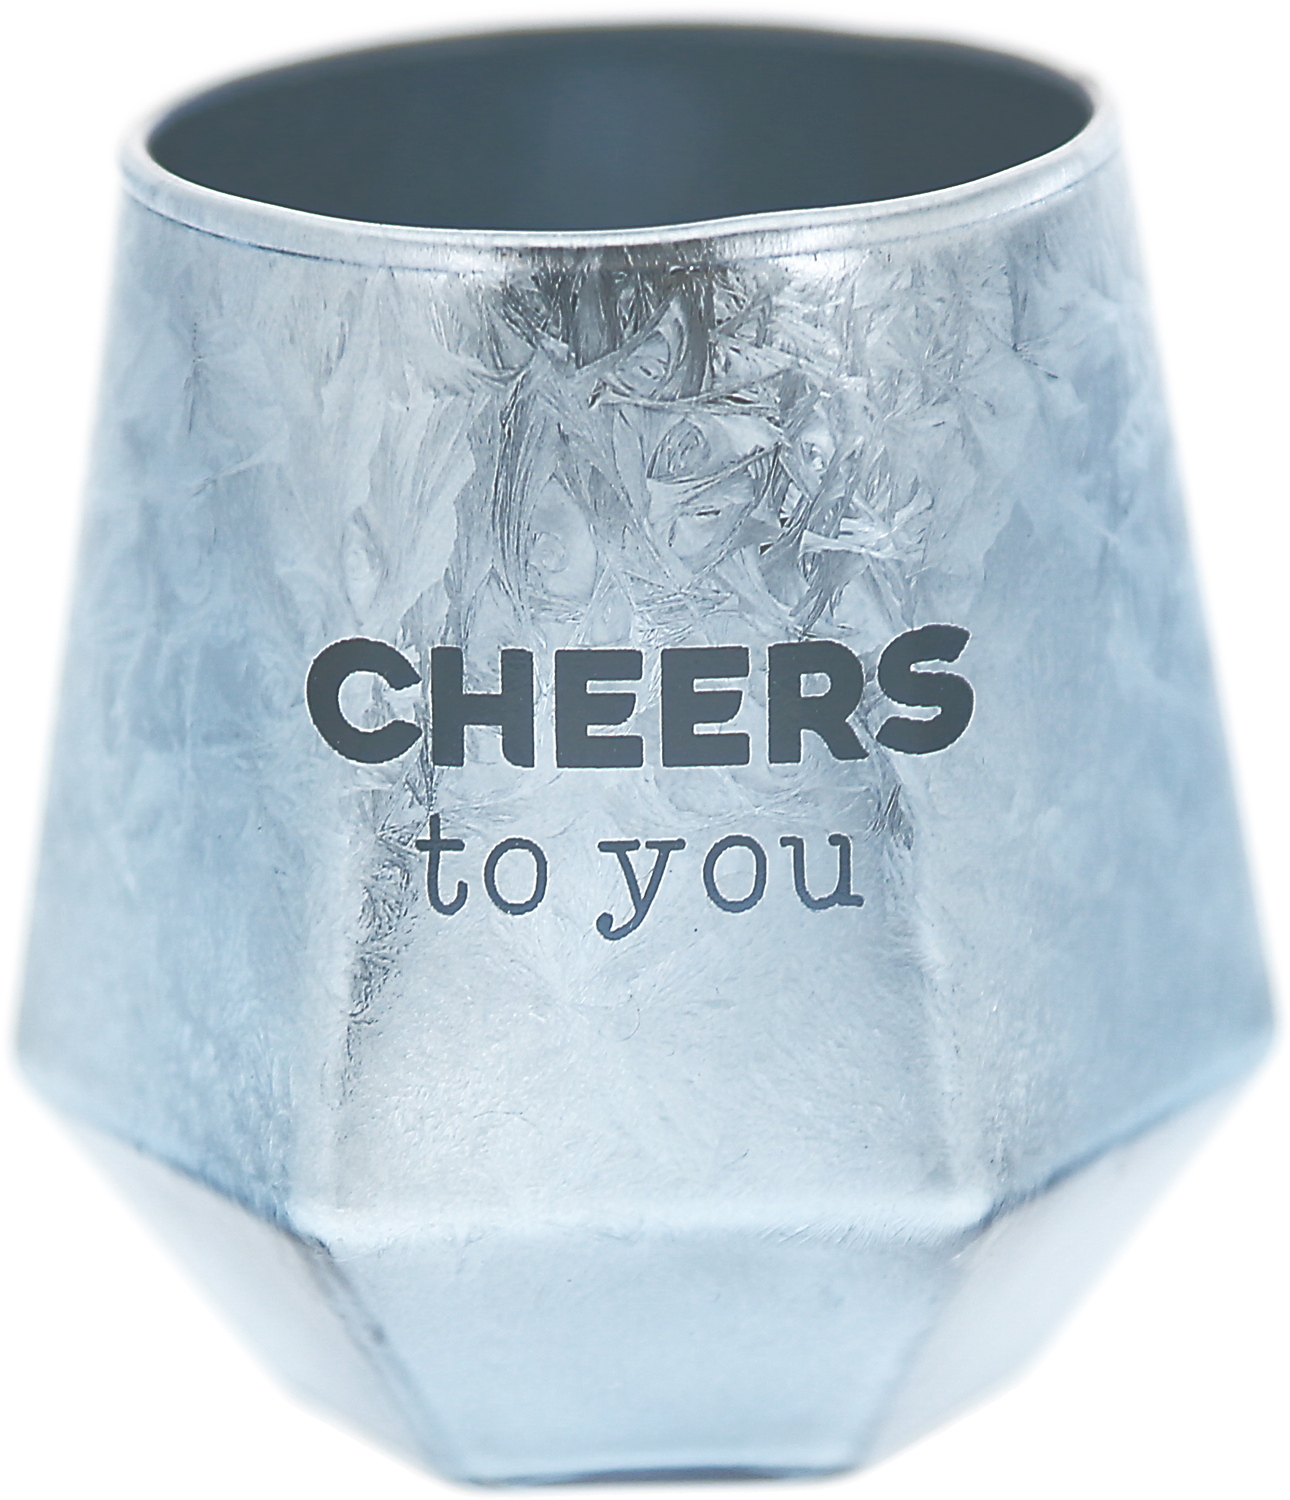 Cheers To You by Happy Confetti to You - Cheers To You - 3 oz Geometric Shot Glass